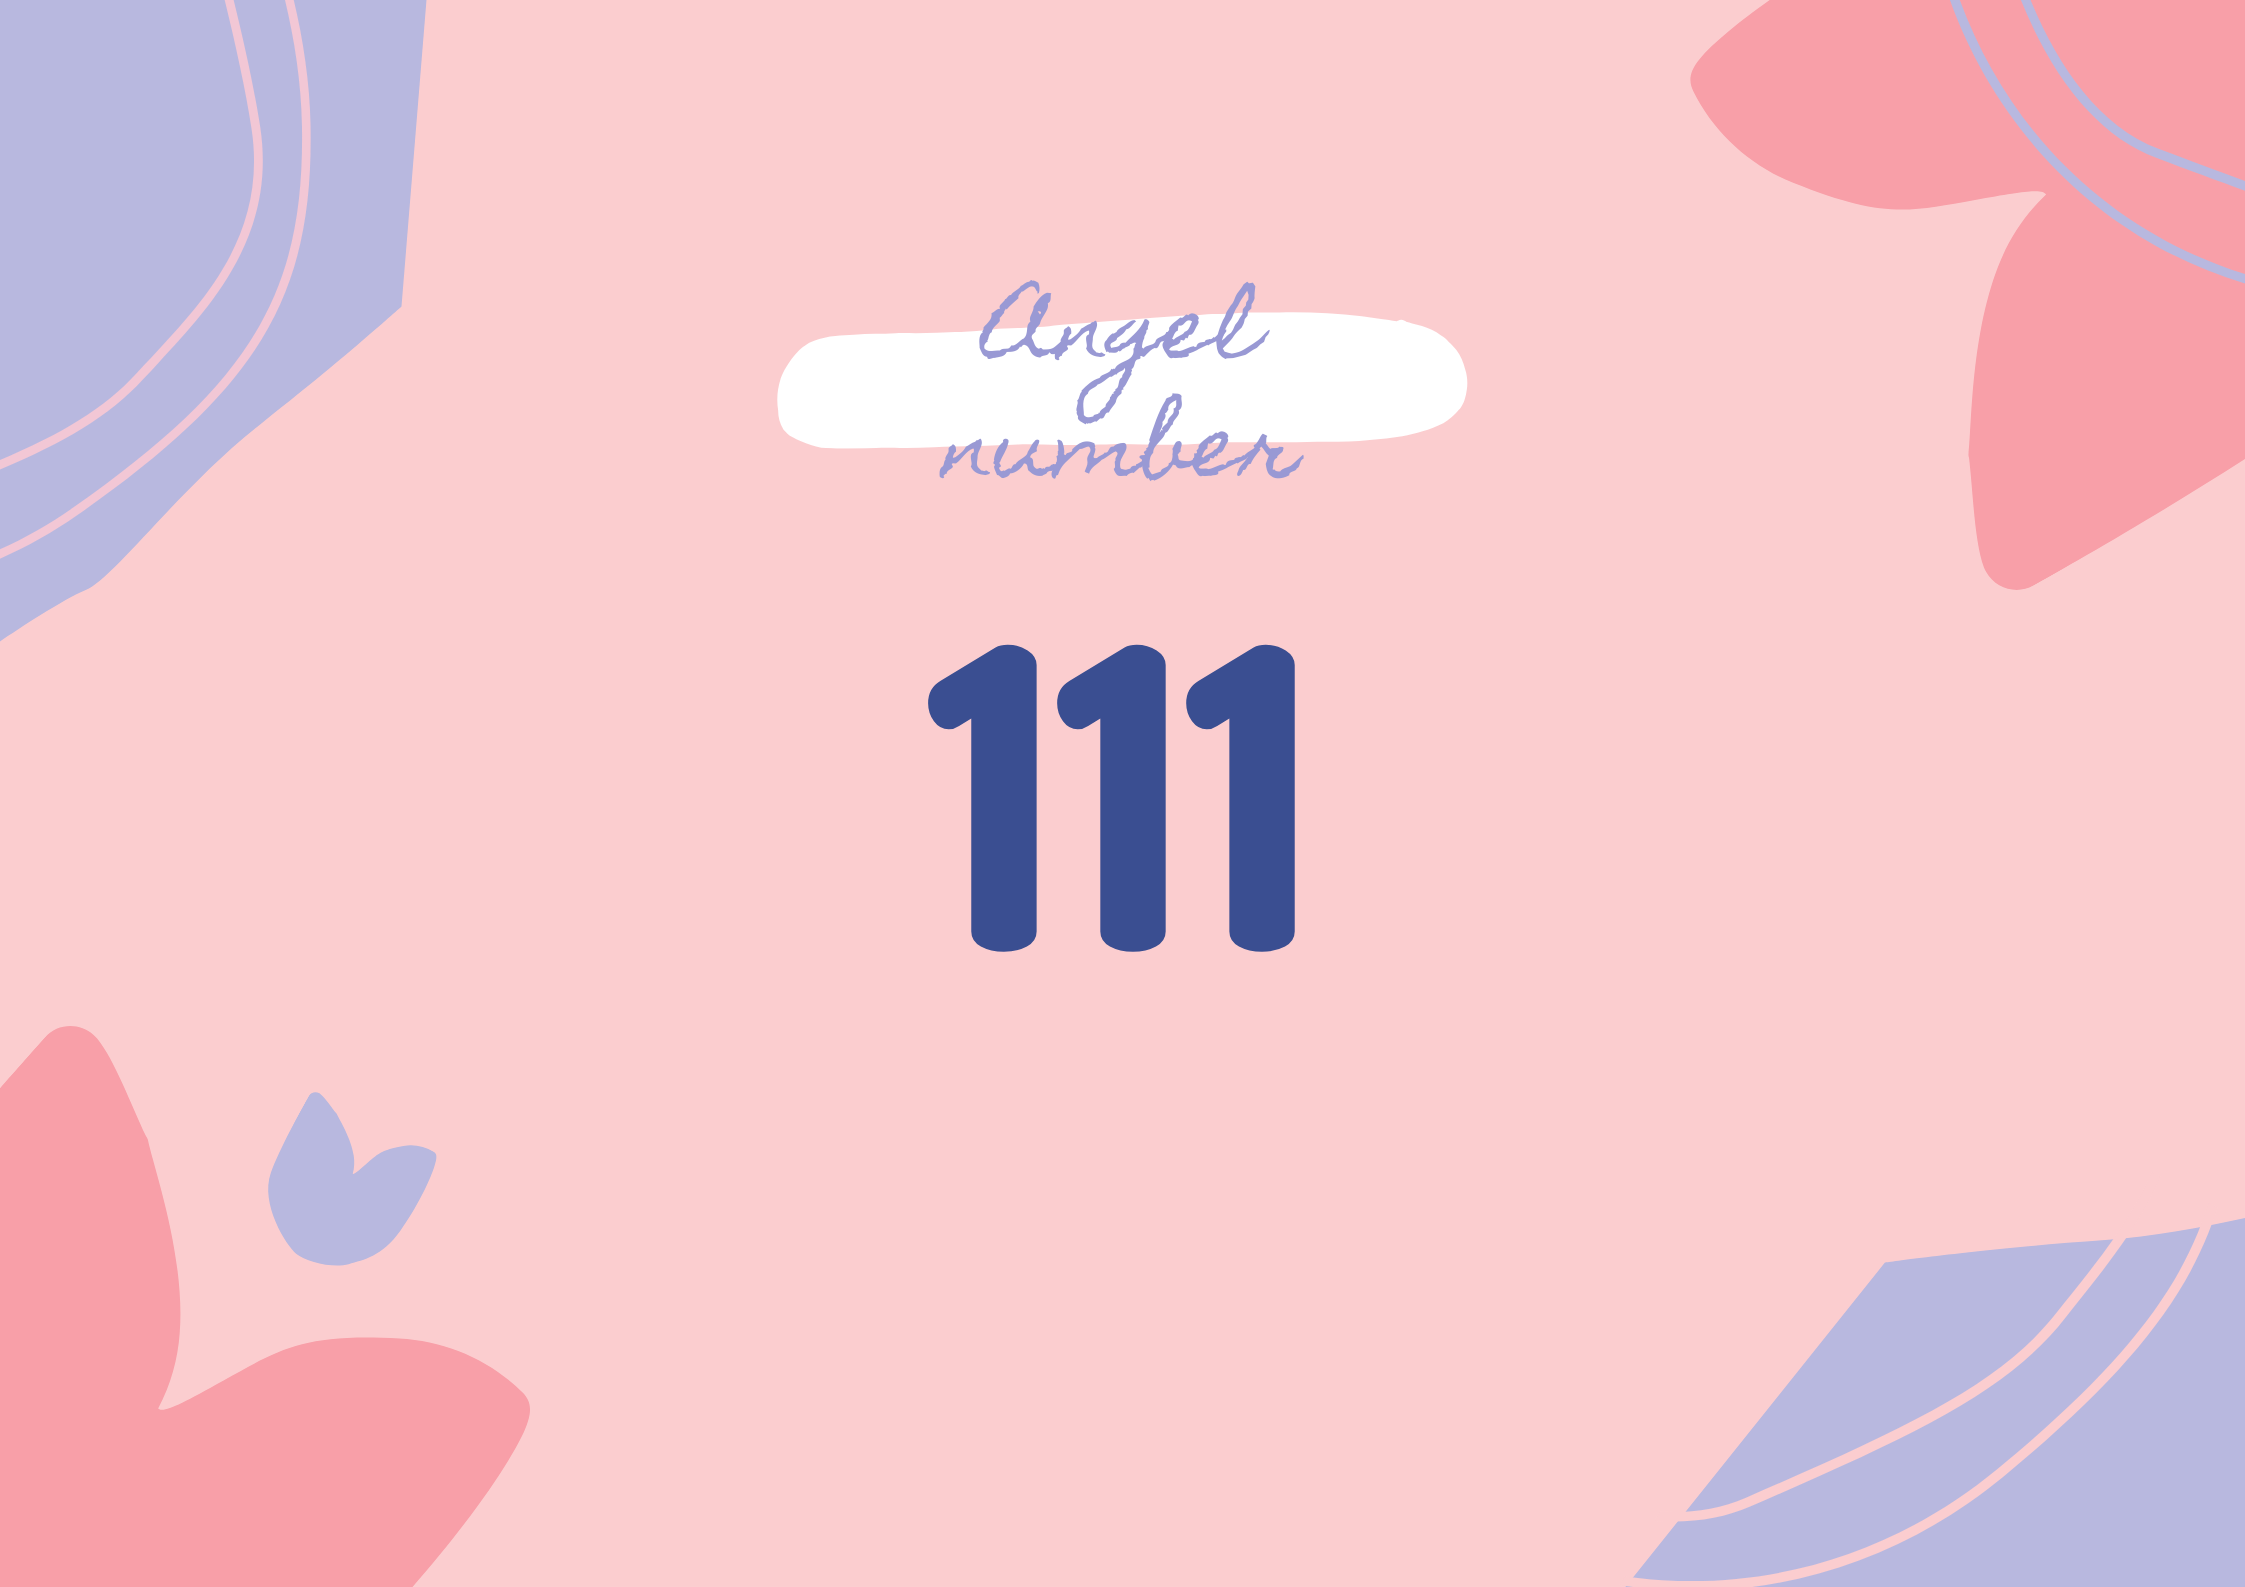 What Is The Meaning behind 111?